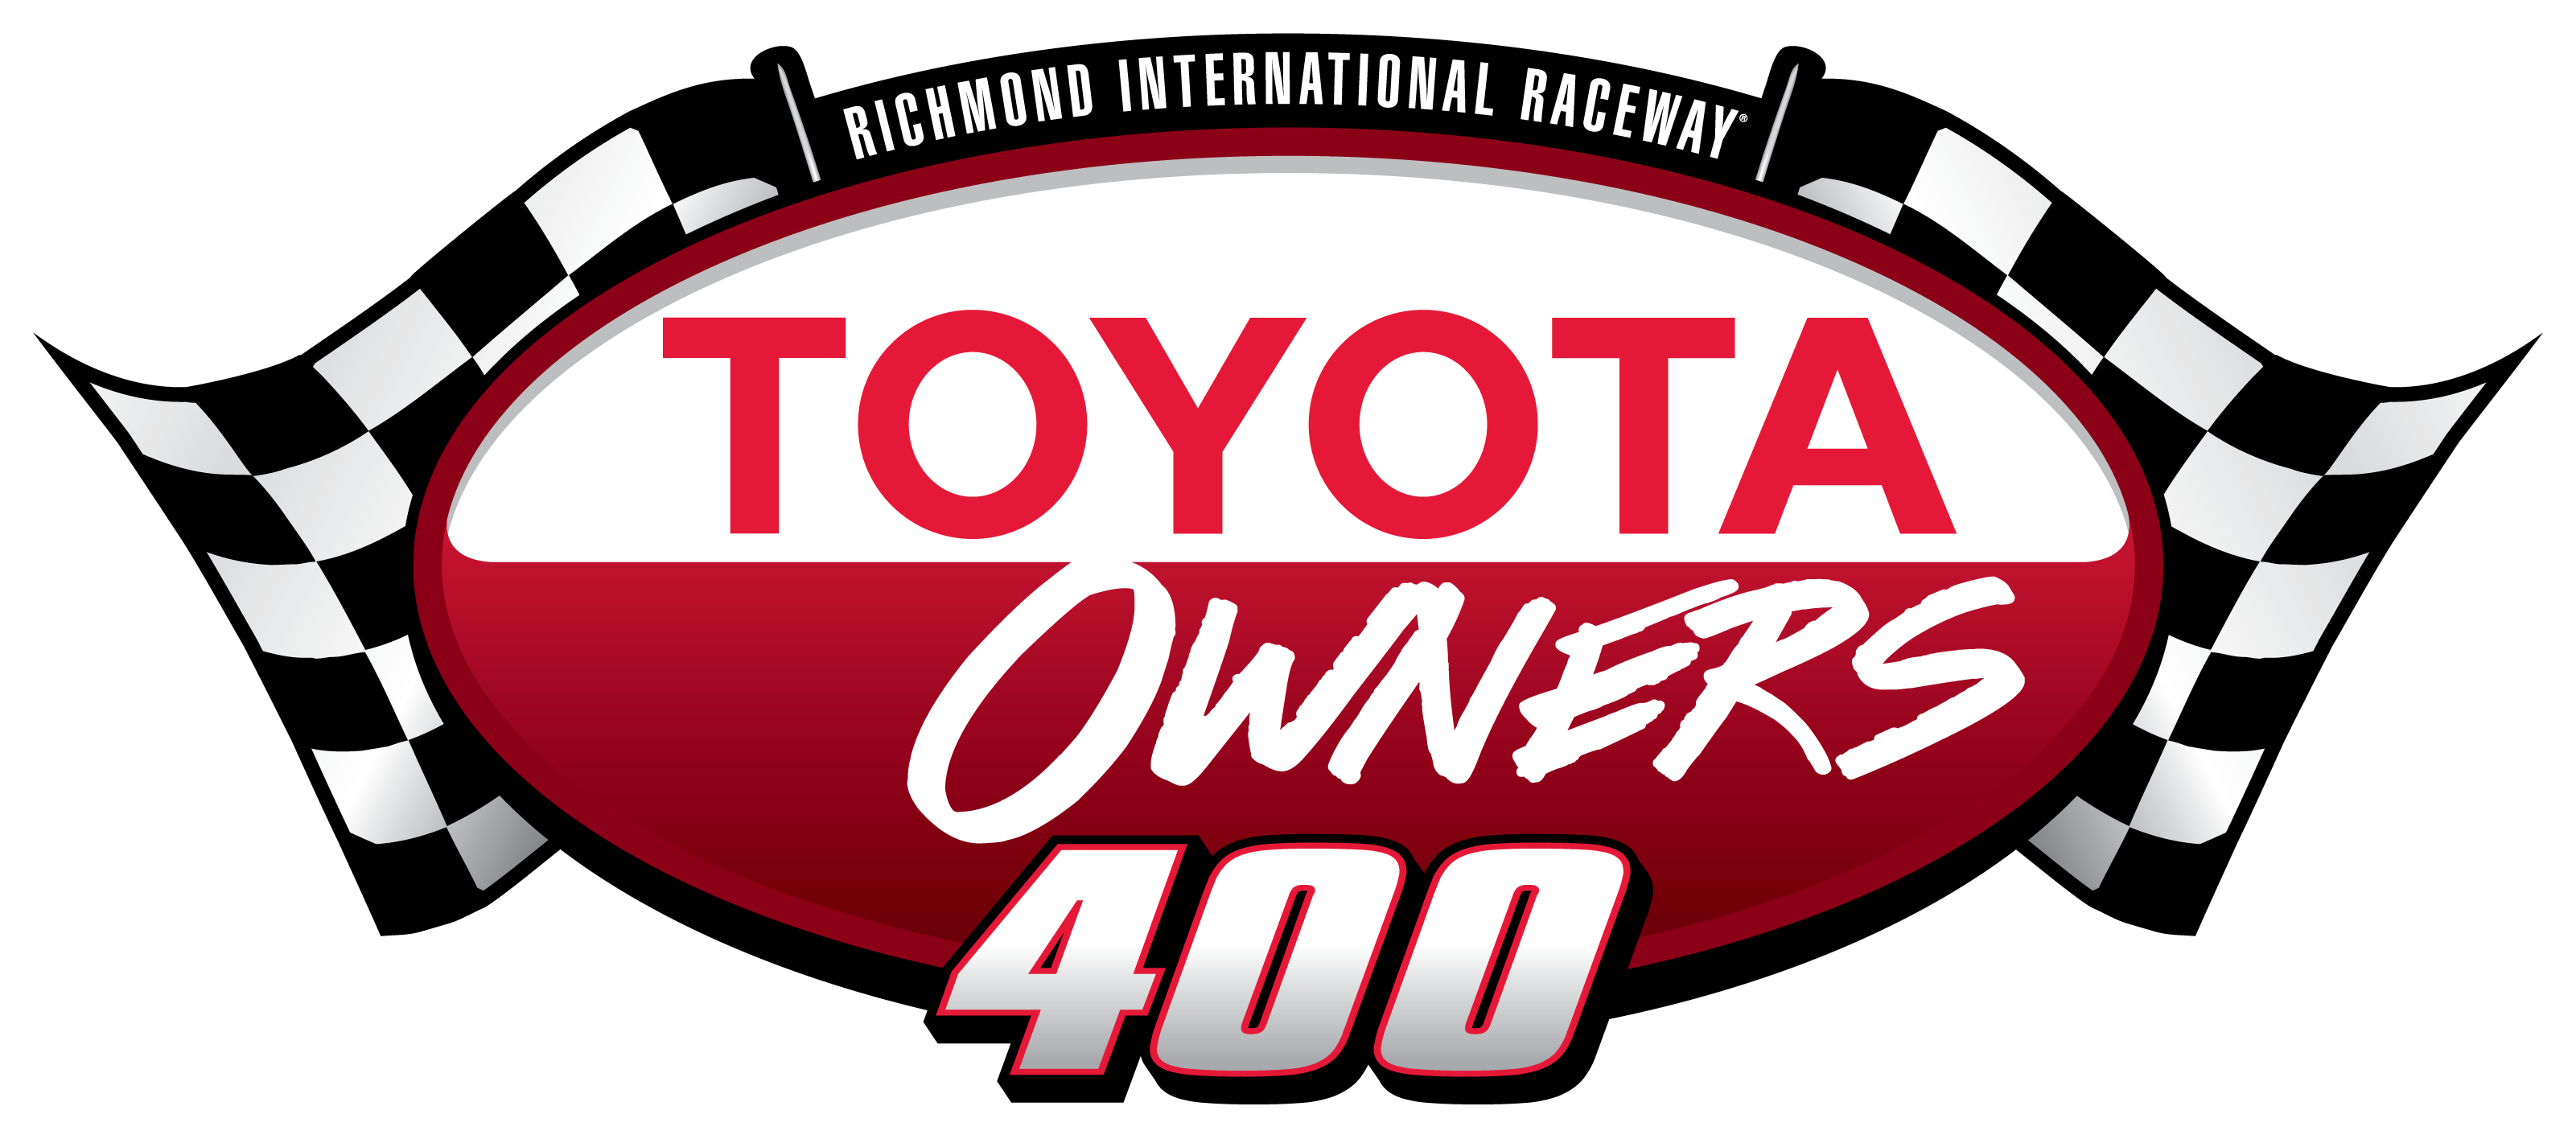 Rir Owners400 - 2018 Toyota Owners 400 (3202x1411)